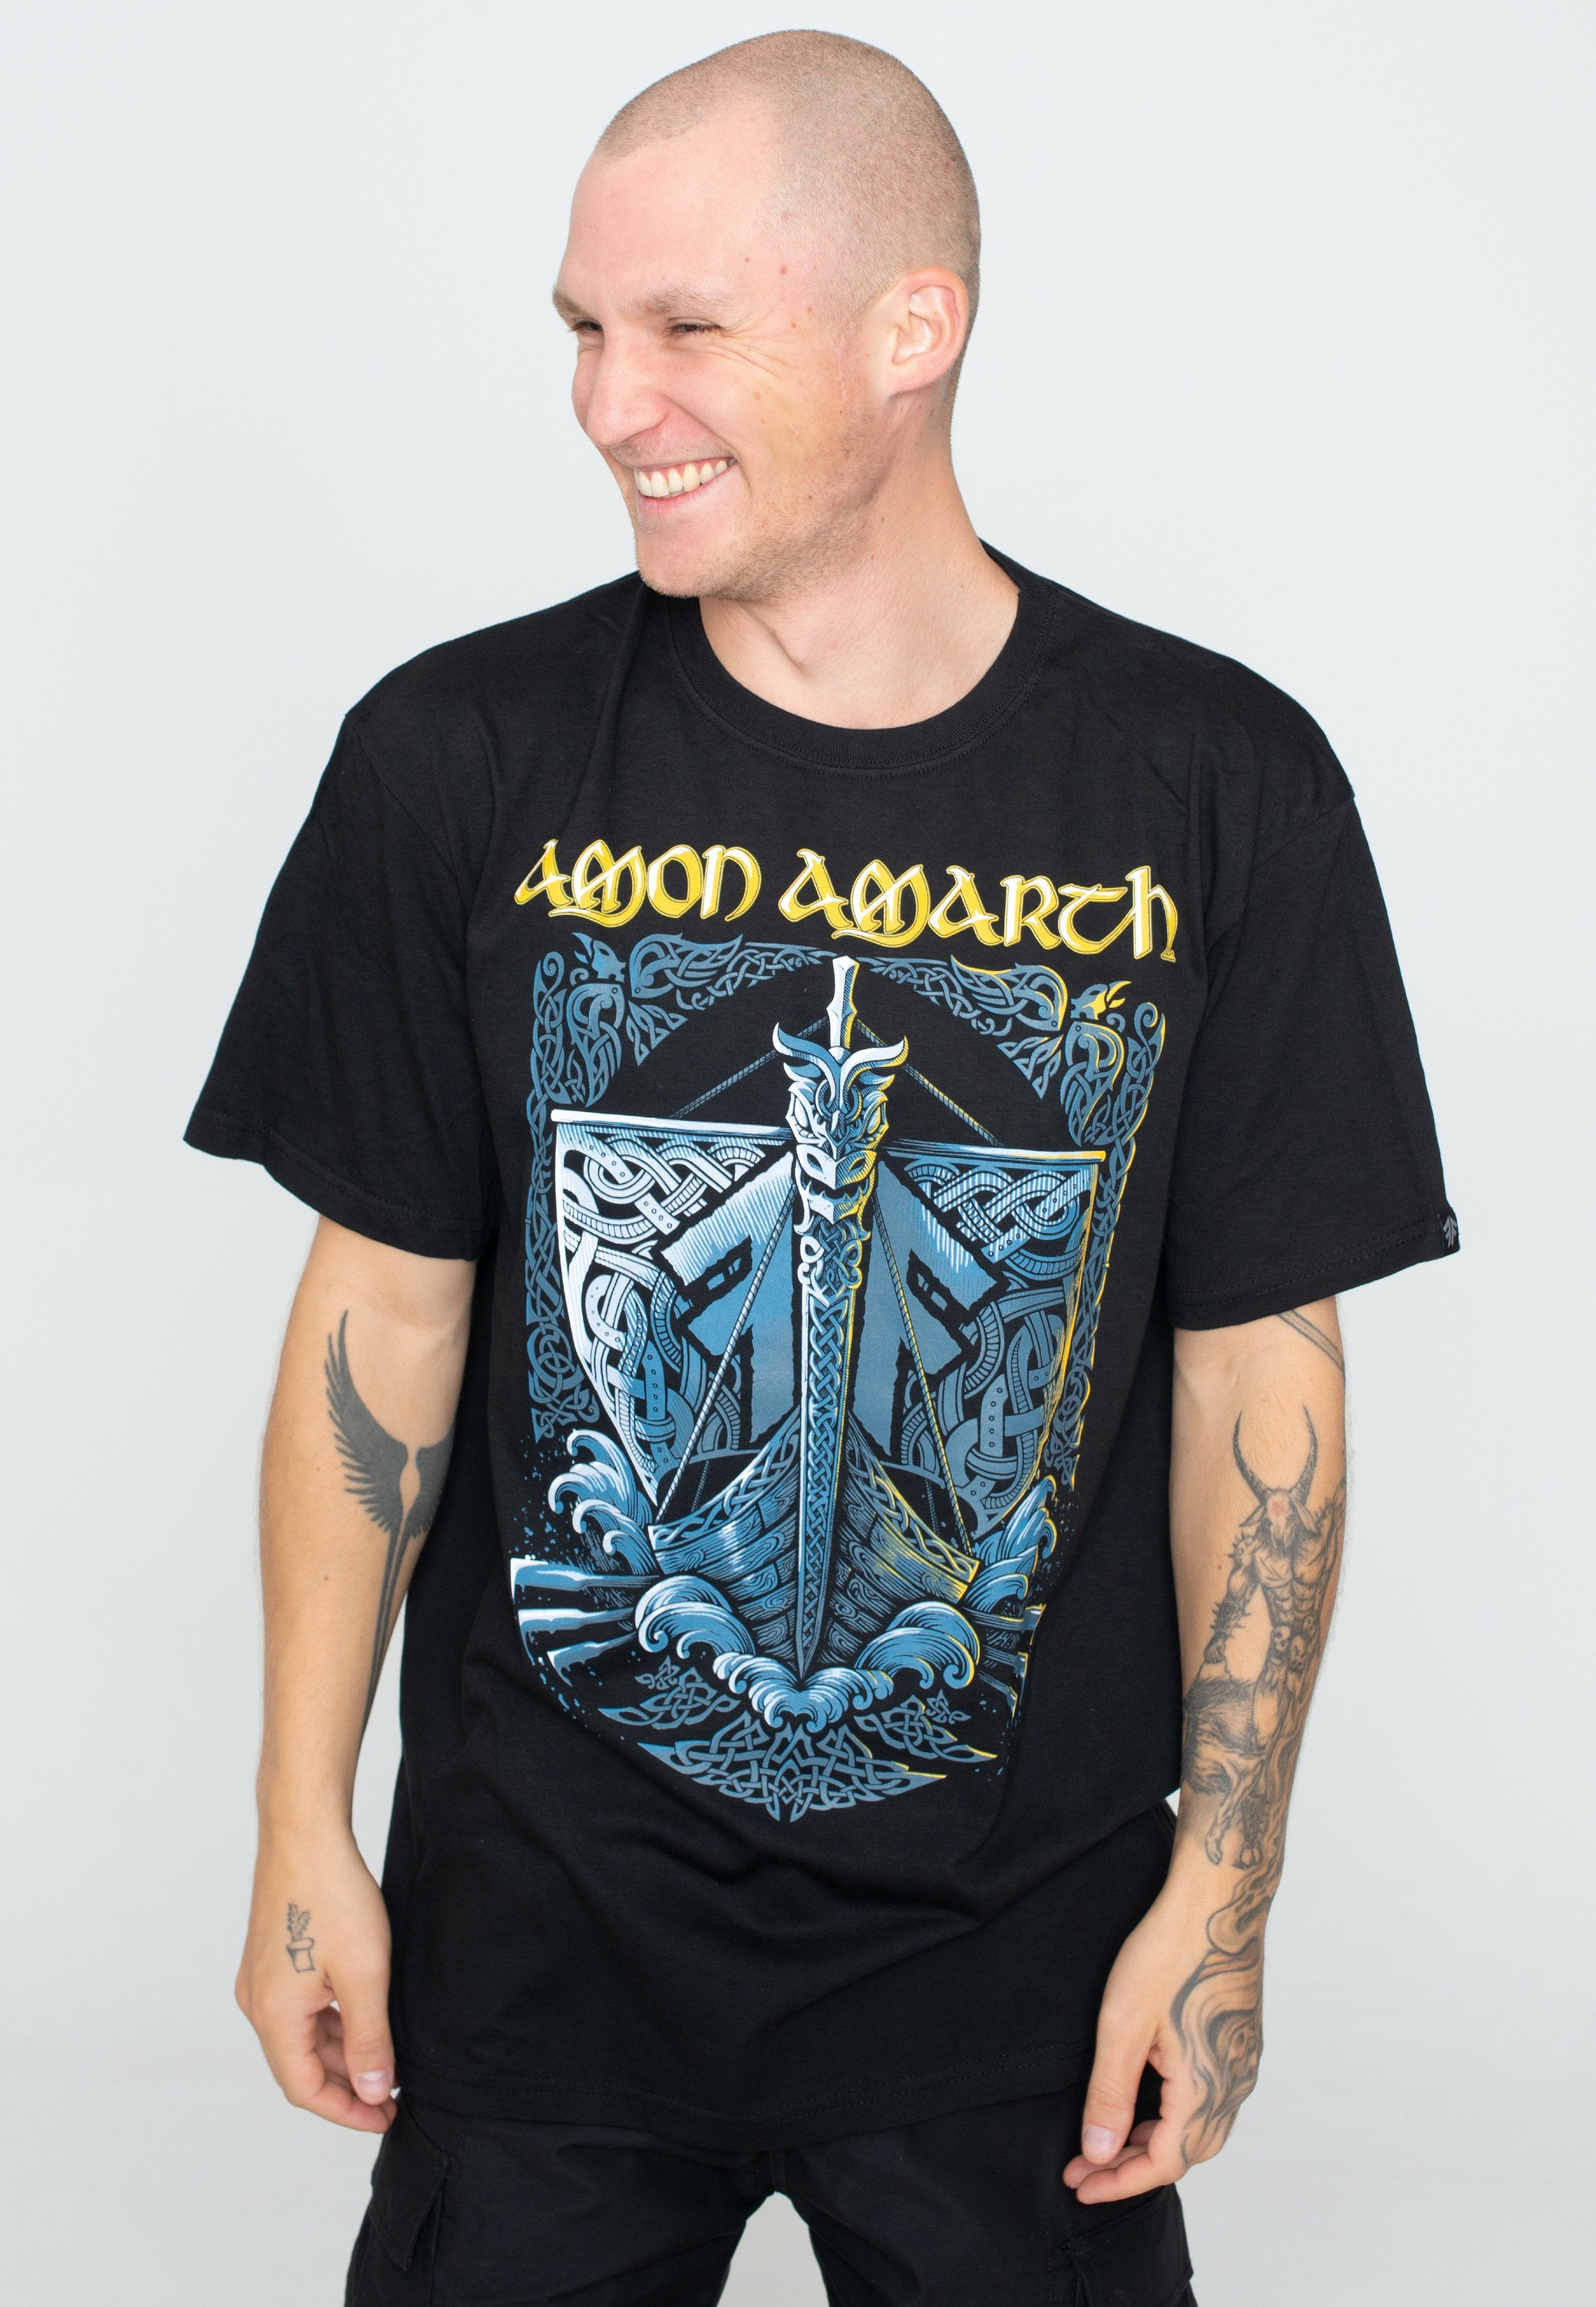 Amon Amarth - Put Your Back Into The Oar - T-Shirt